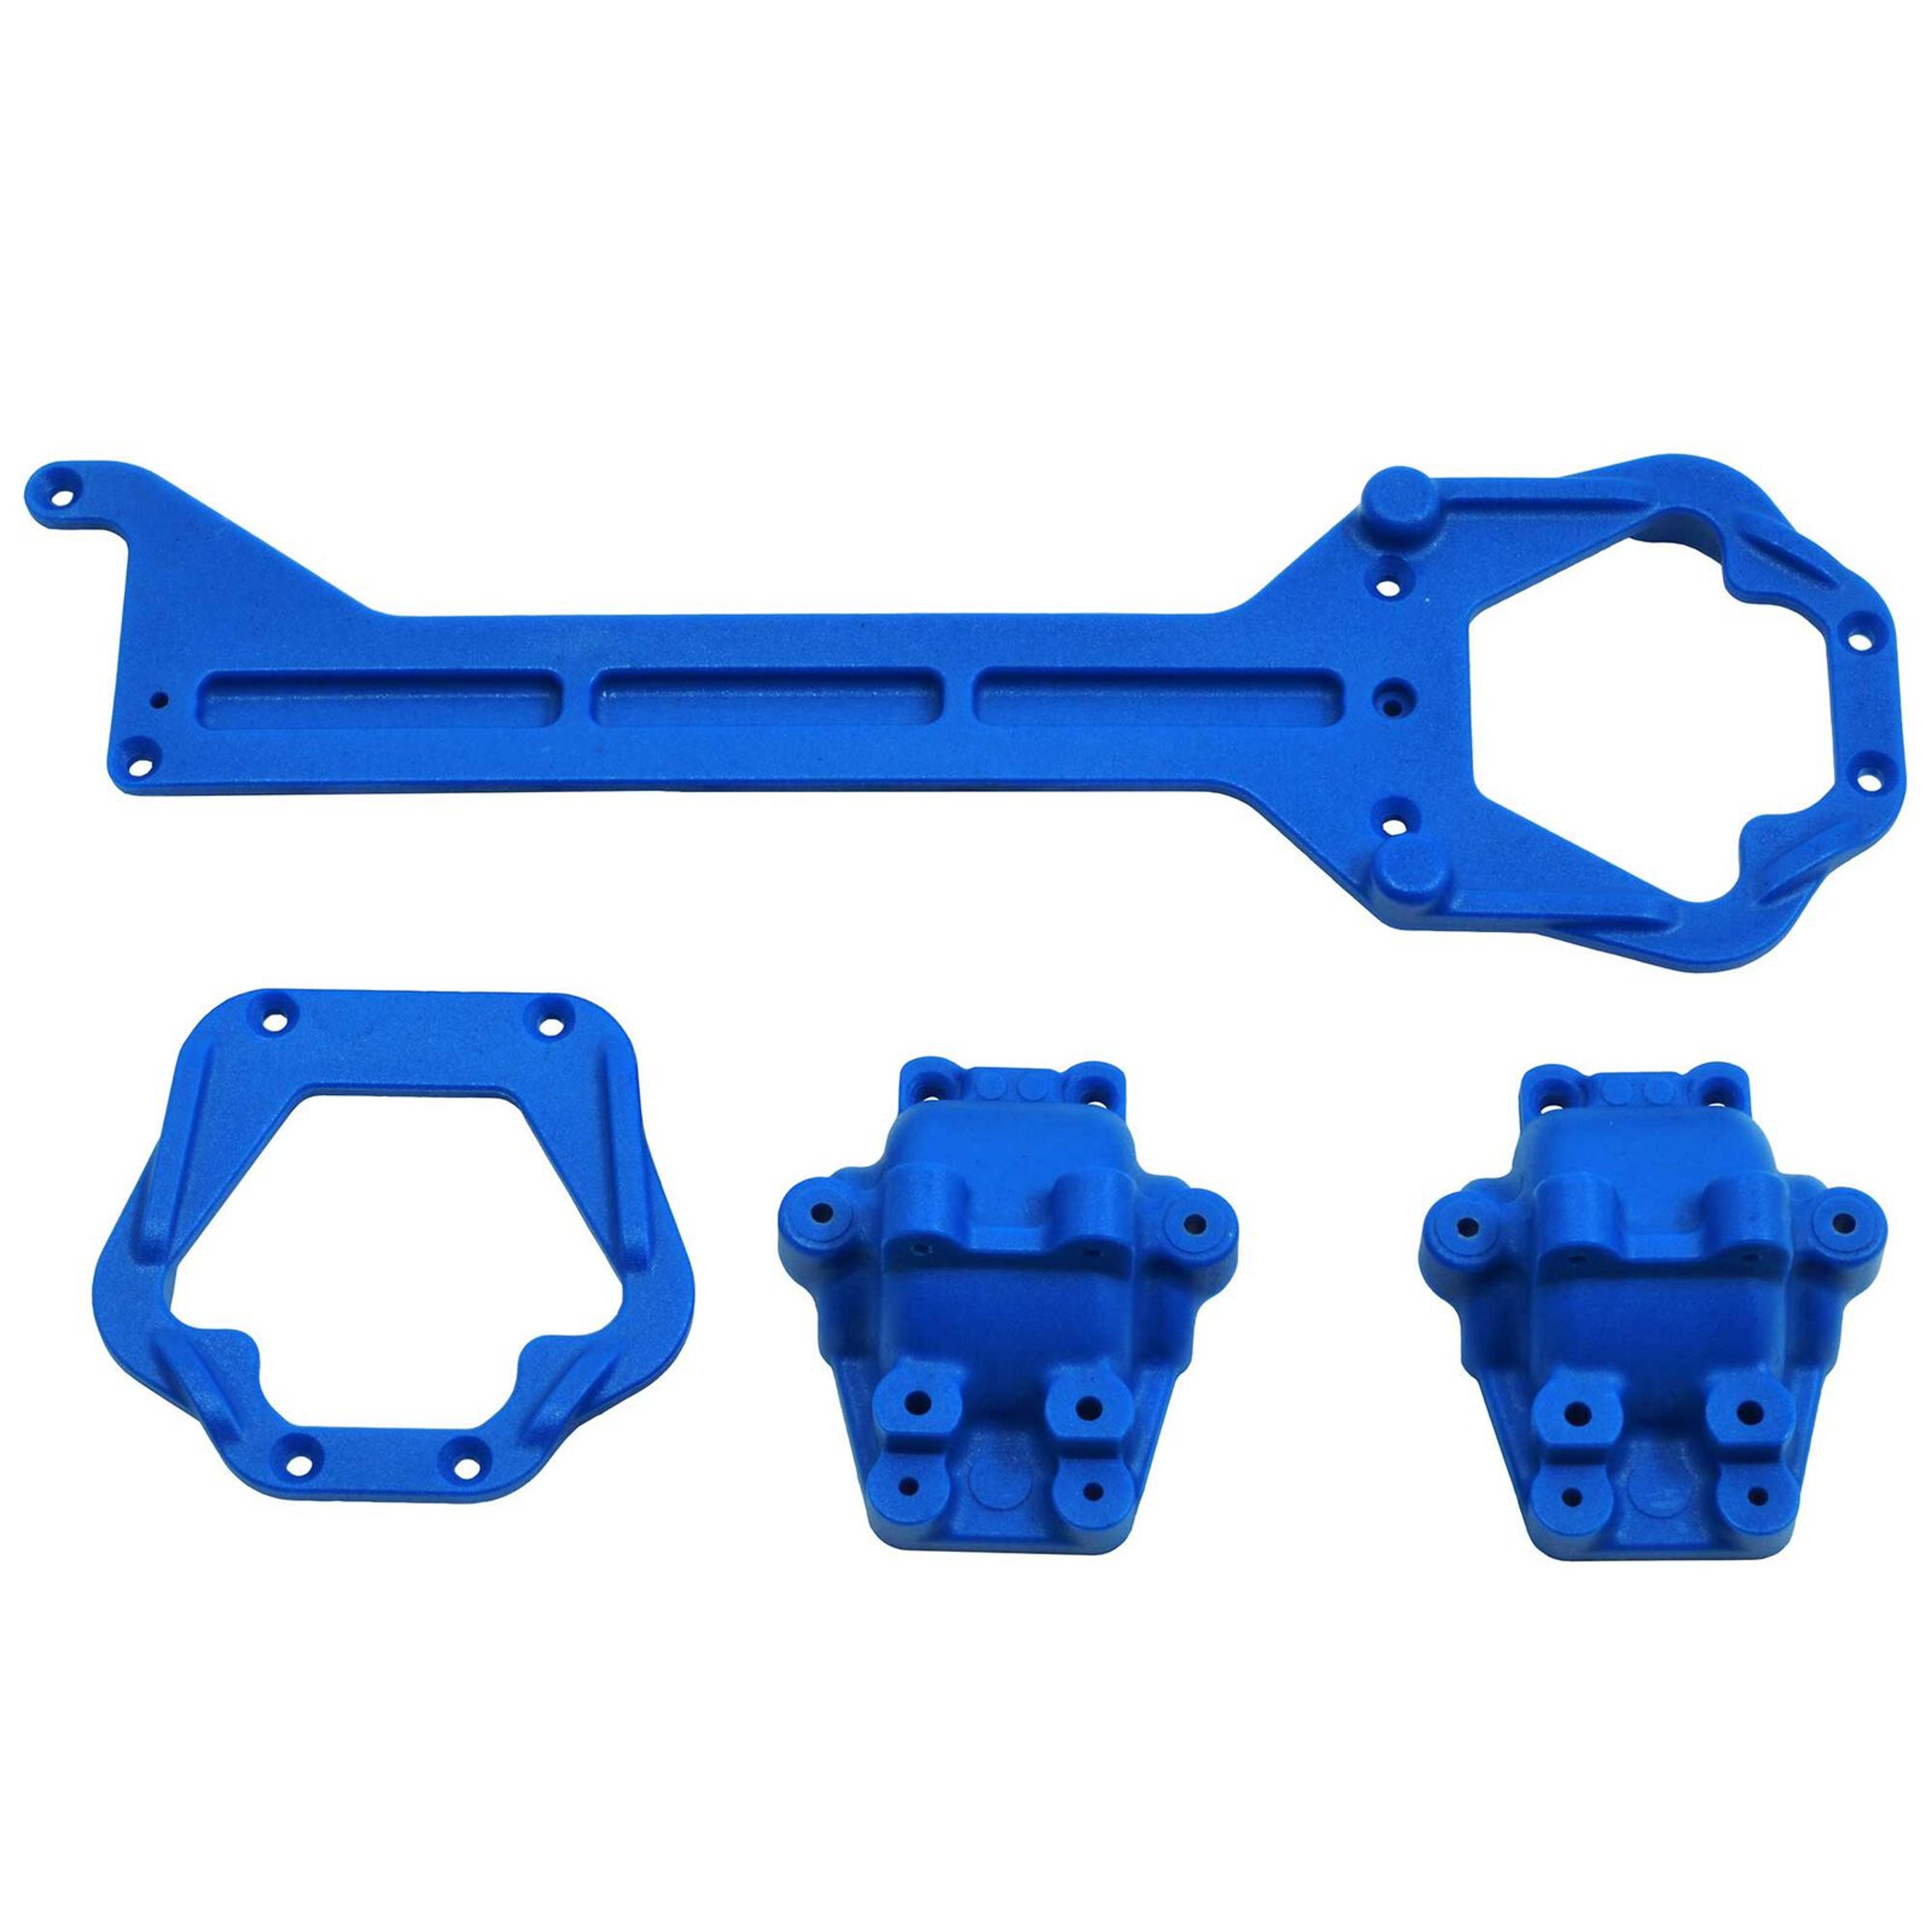 RPM Fr/Rr Upper Chassis Diff Covers for Traxxas LaTraxx (Blue)